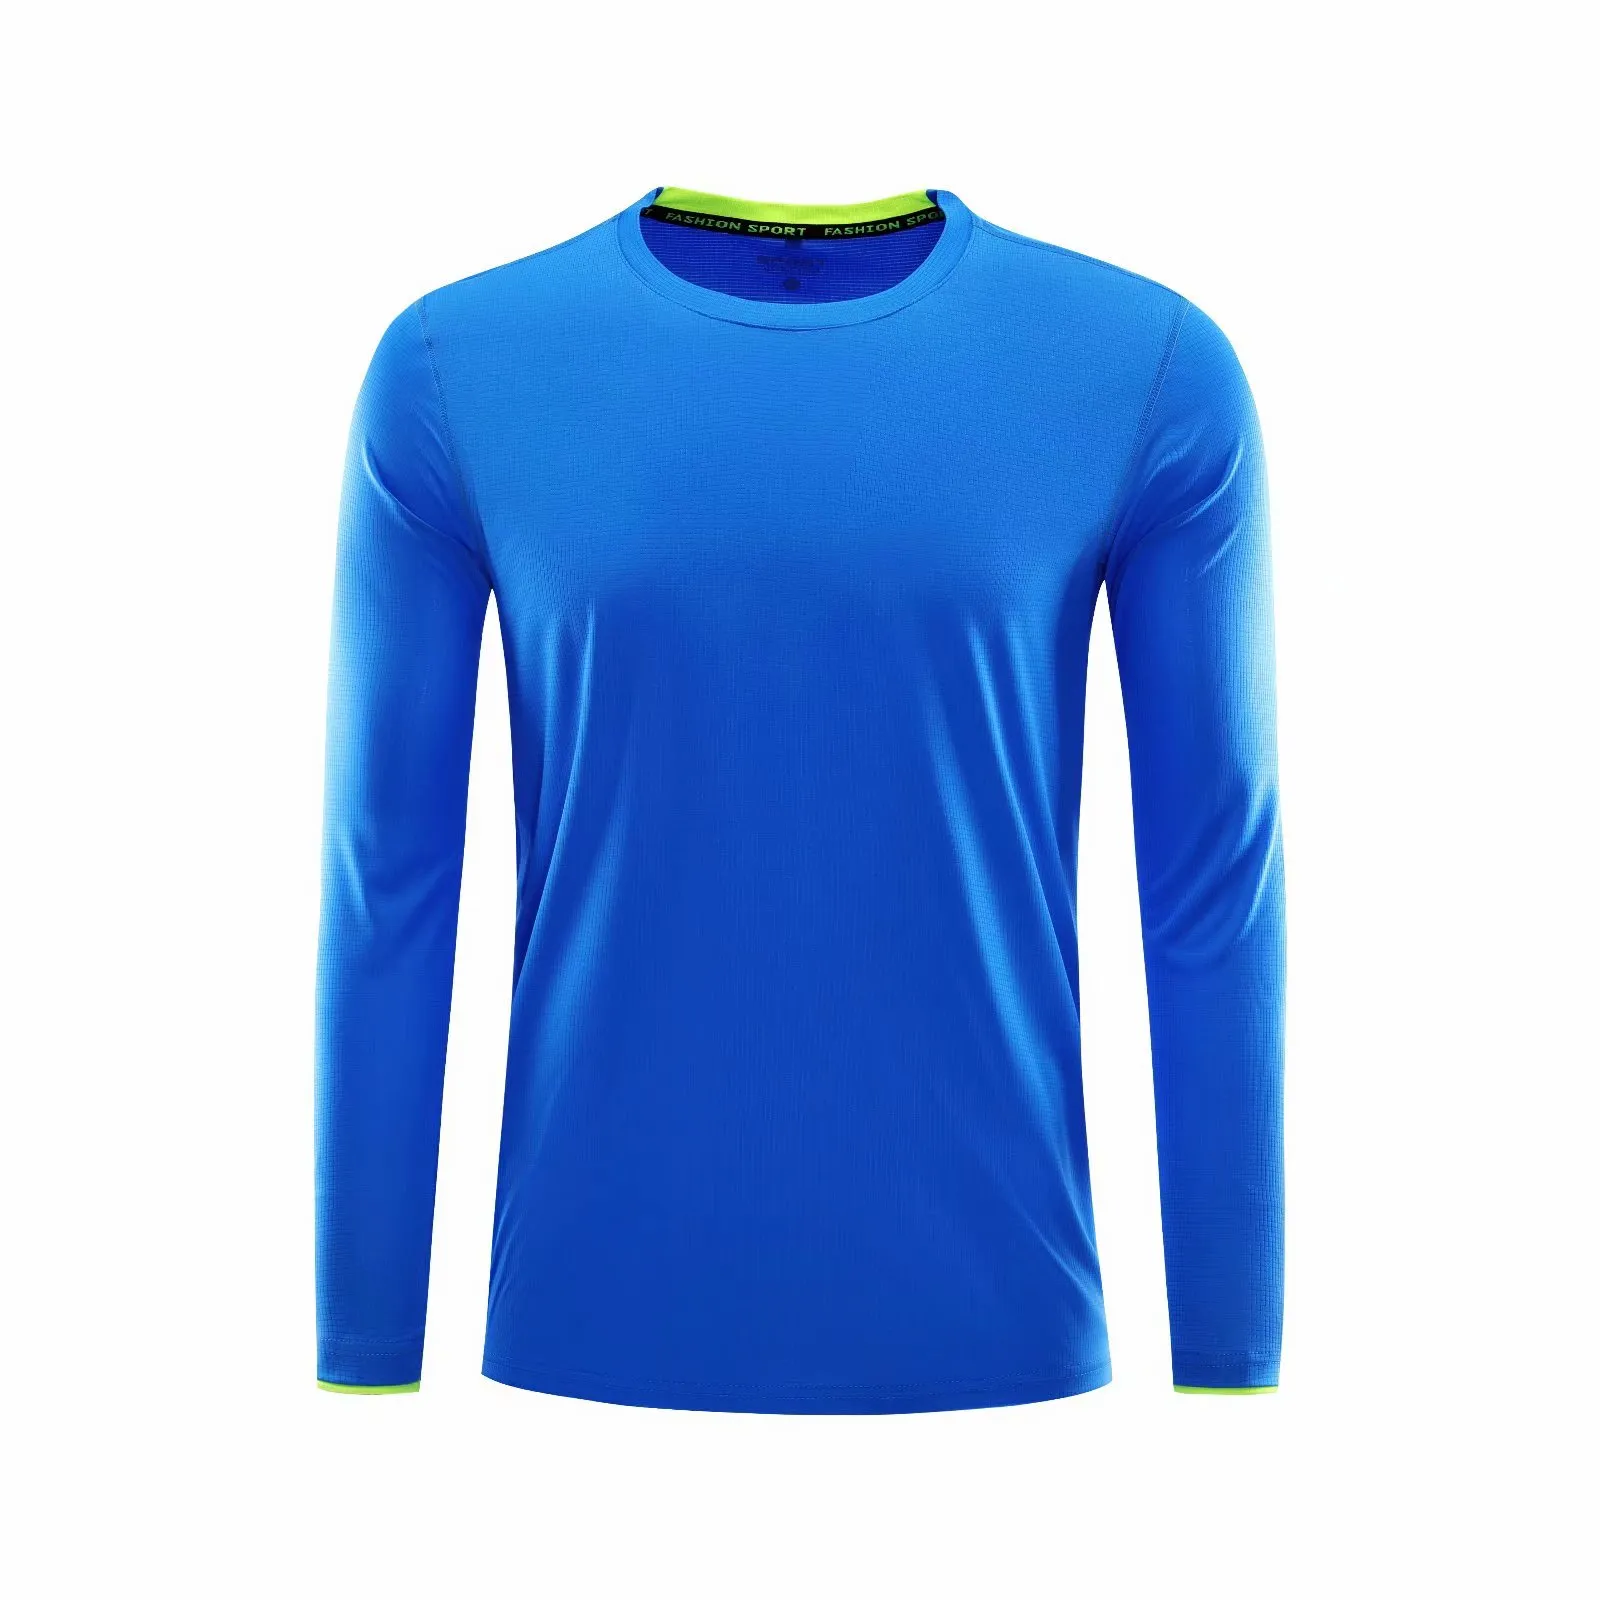 blue Long Sleeve Running Shirt Men Fitness Gym Sportswear Fit Quick dry Compression Workout Sport Top